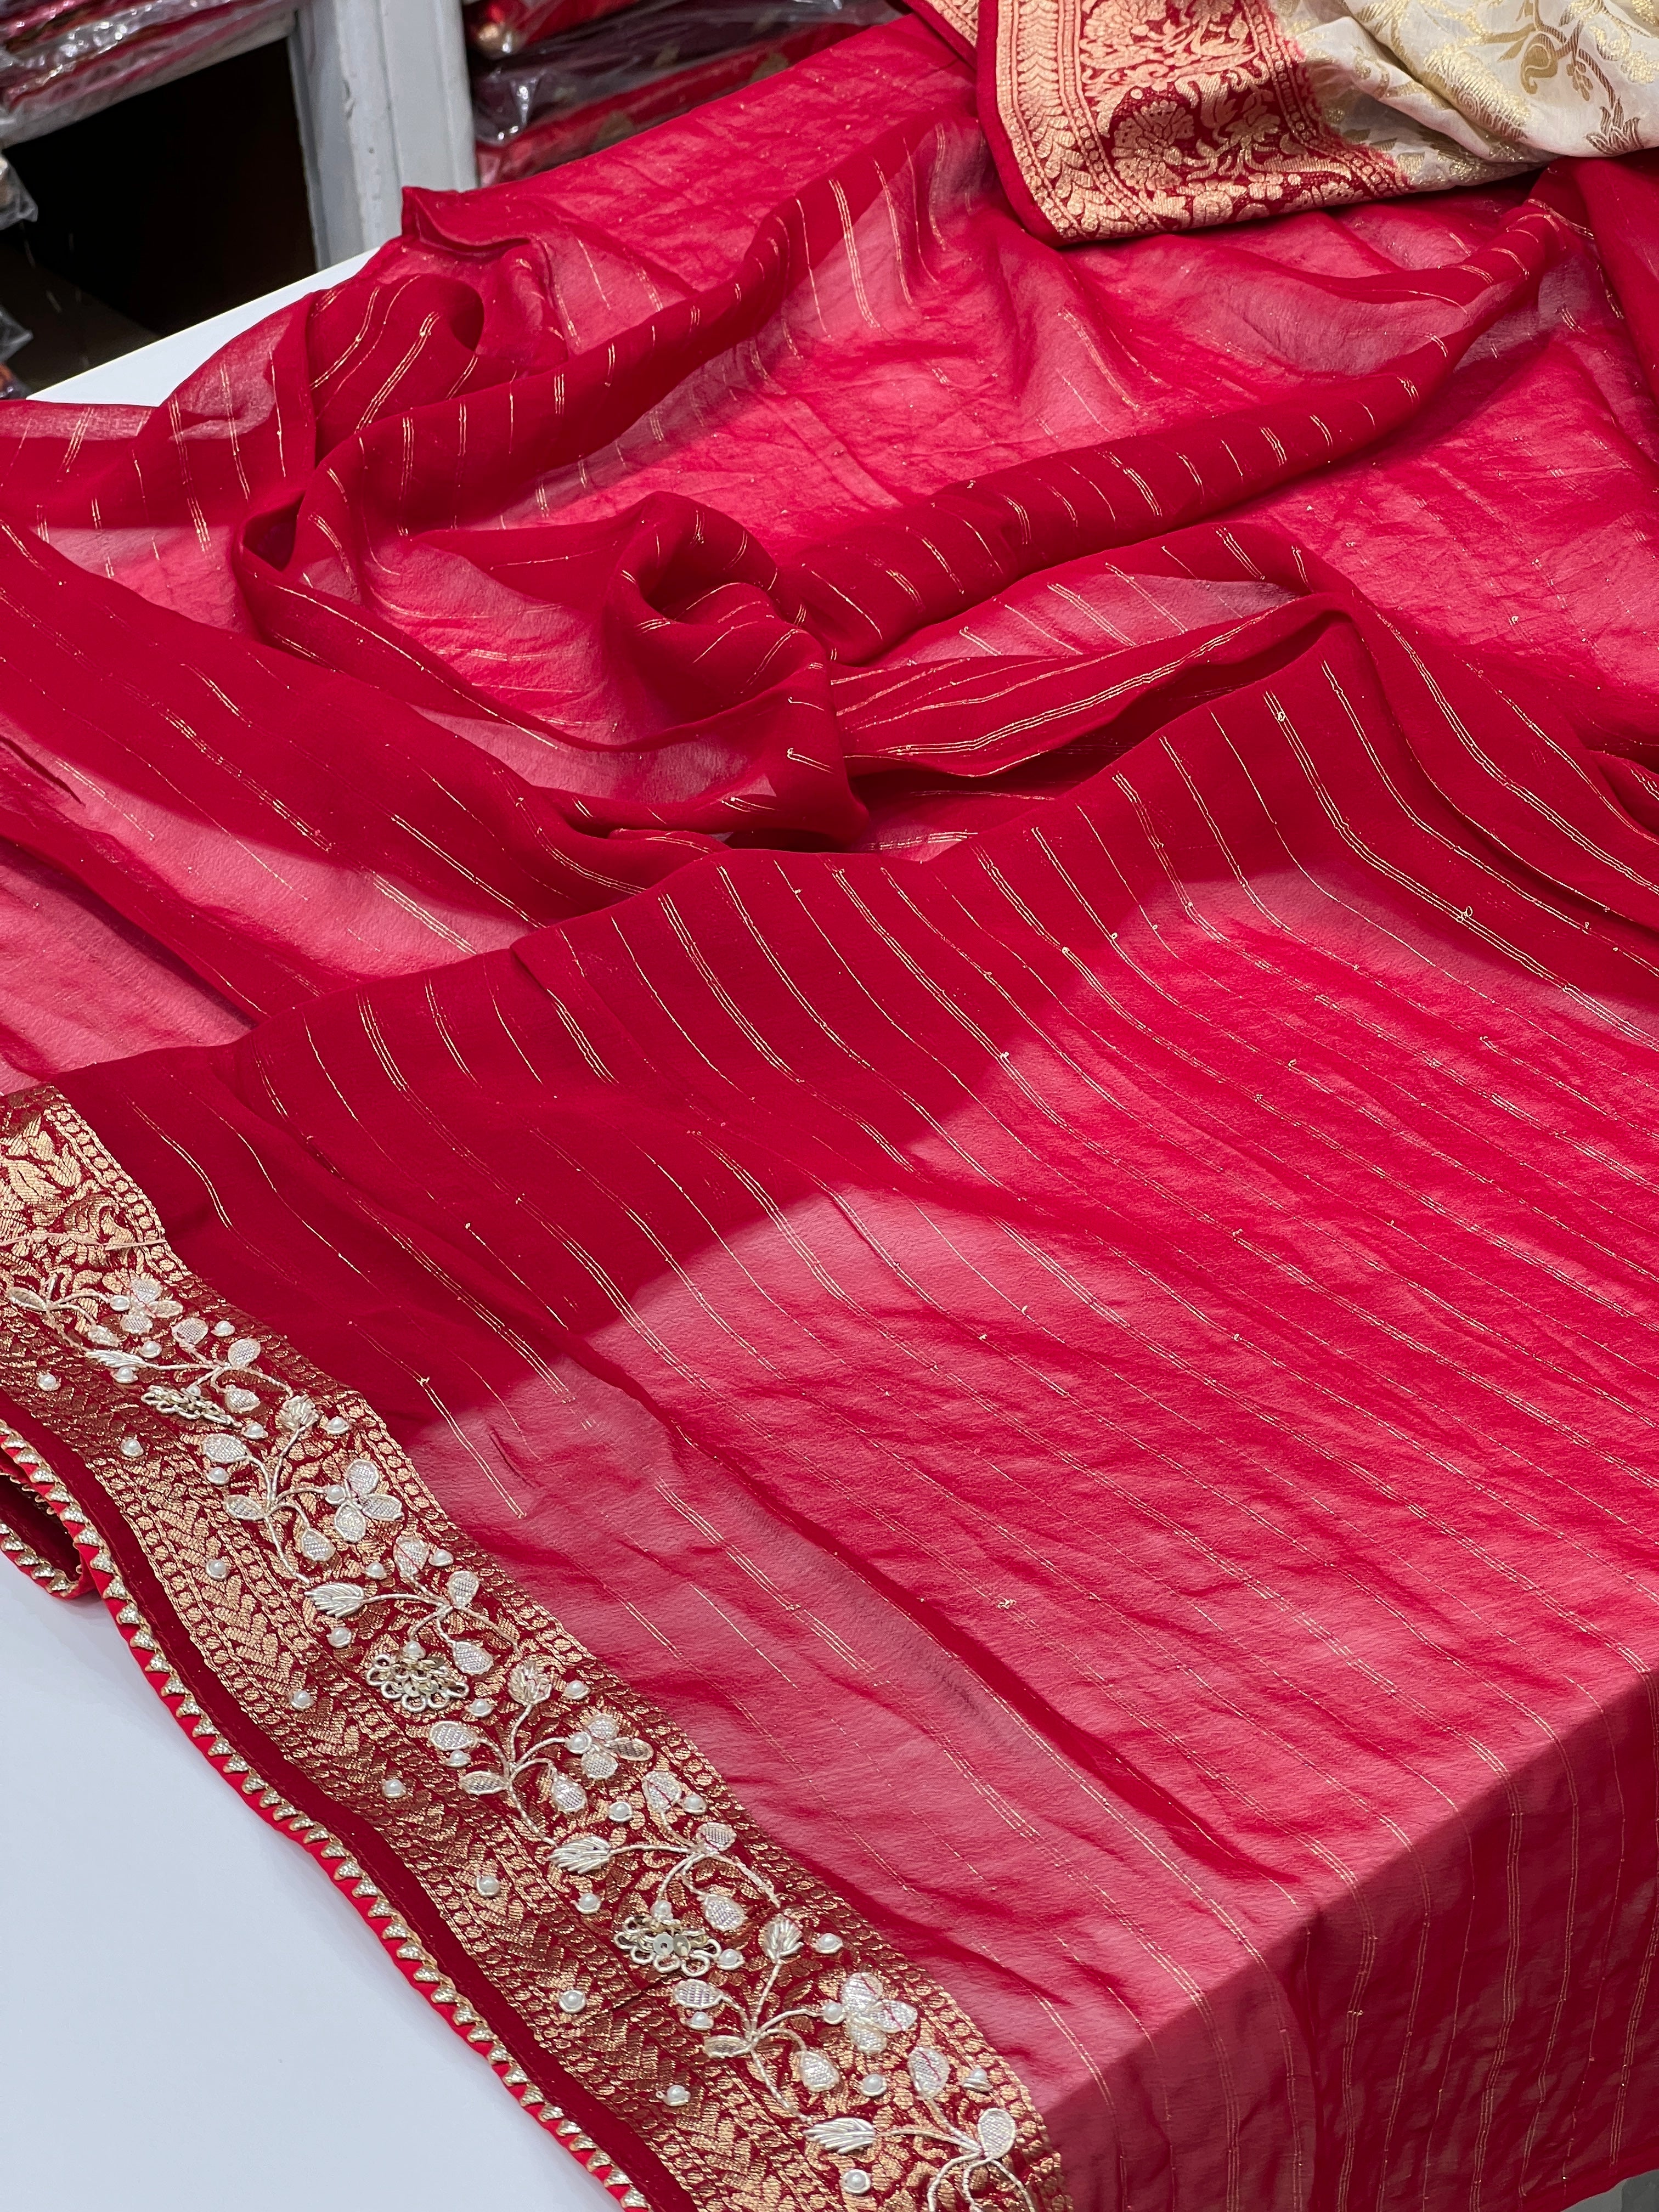 Beige Georgette Jaal Saree with Moti Hand Embroidery and Red Border